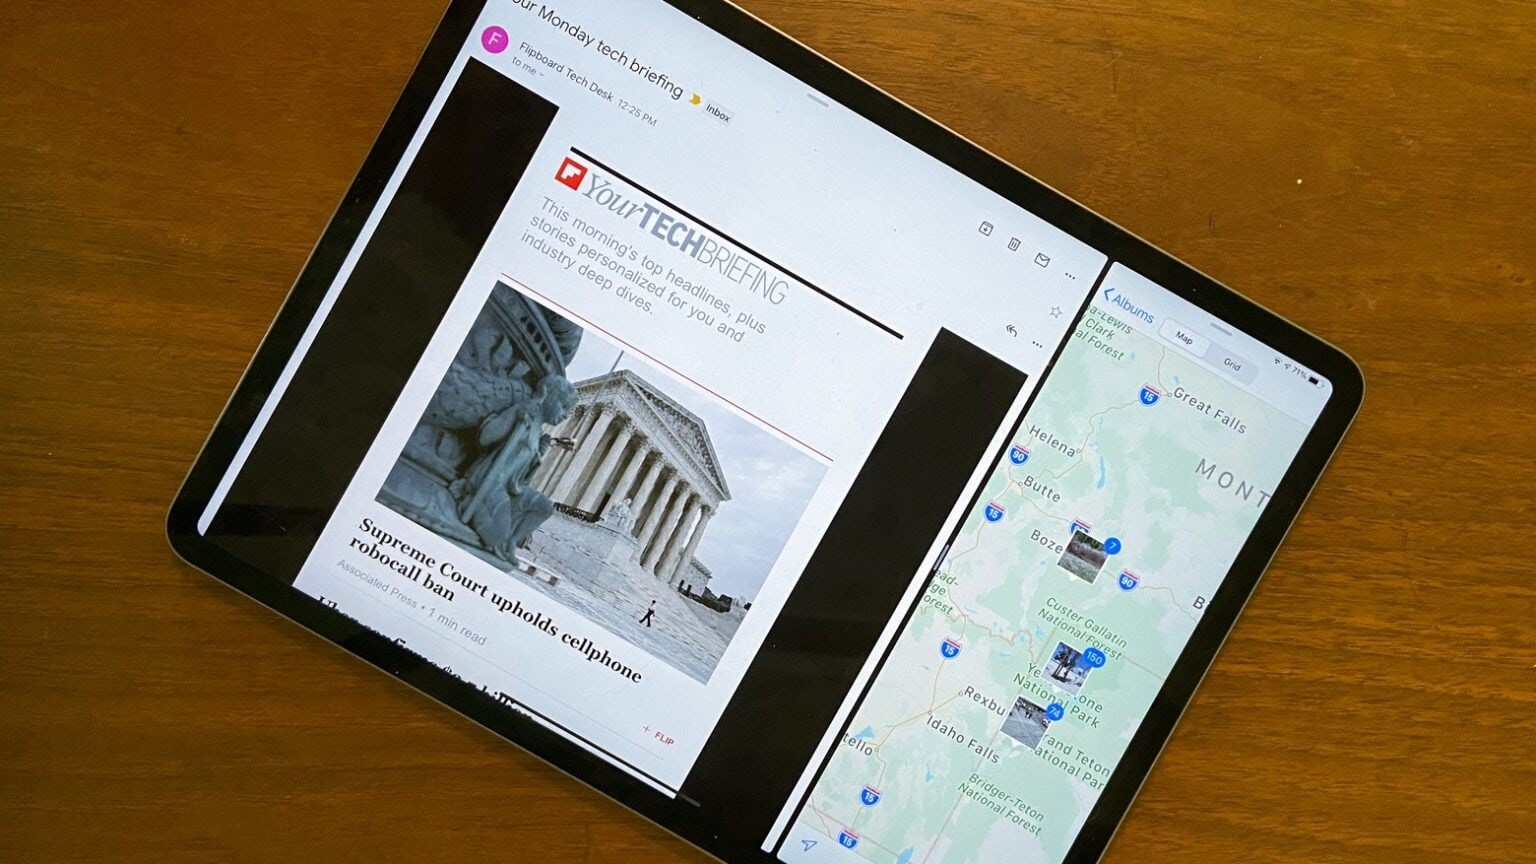 In a long-overdue move, Google added Split View to the Gmail iPad app.